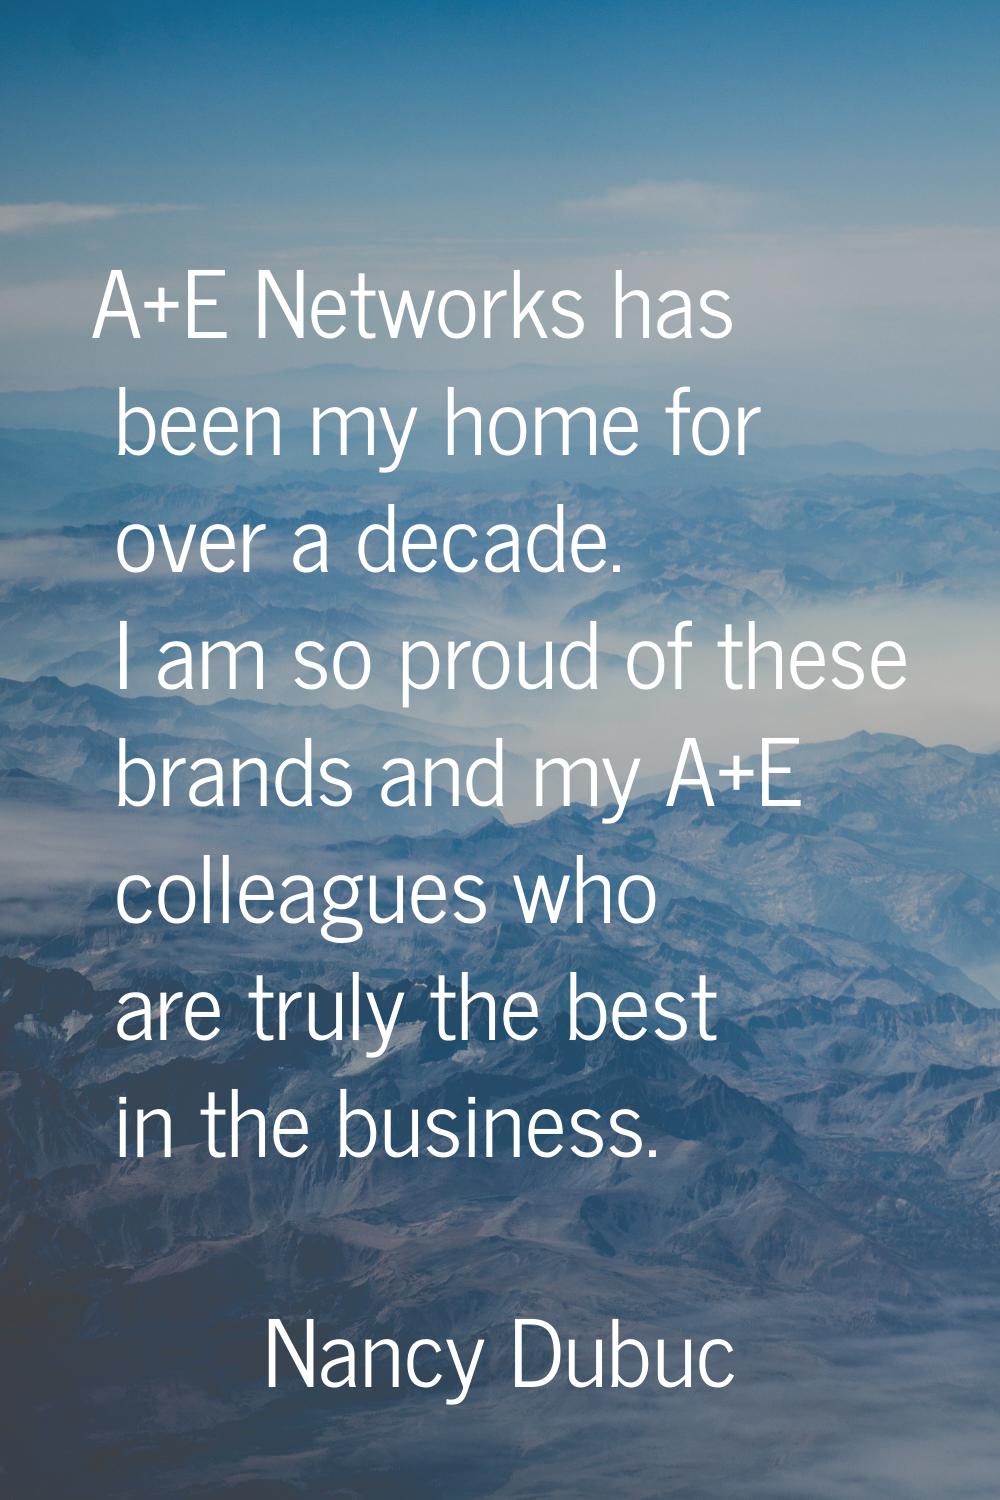 A+E Networks has been my home for over a decade. I am so proud of these brands and my A+E colleague